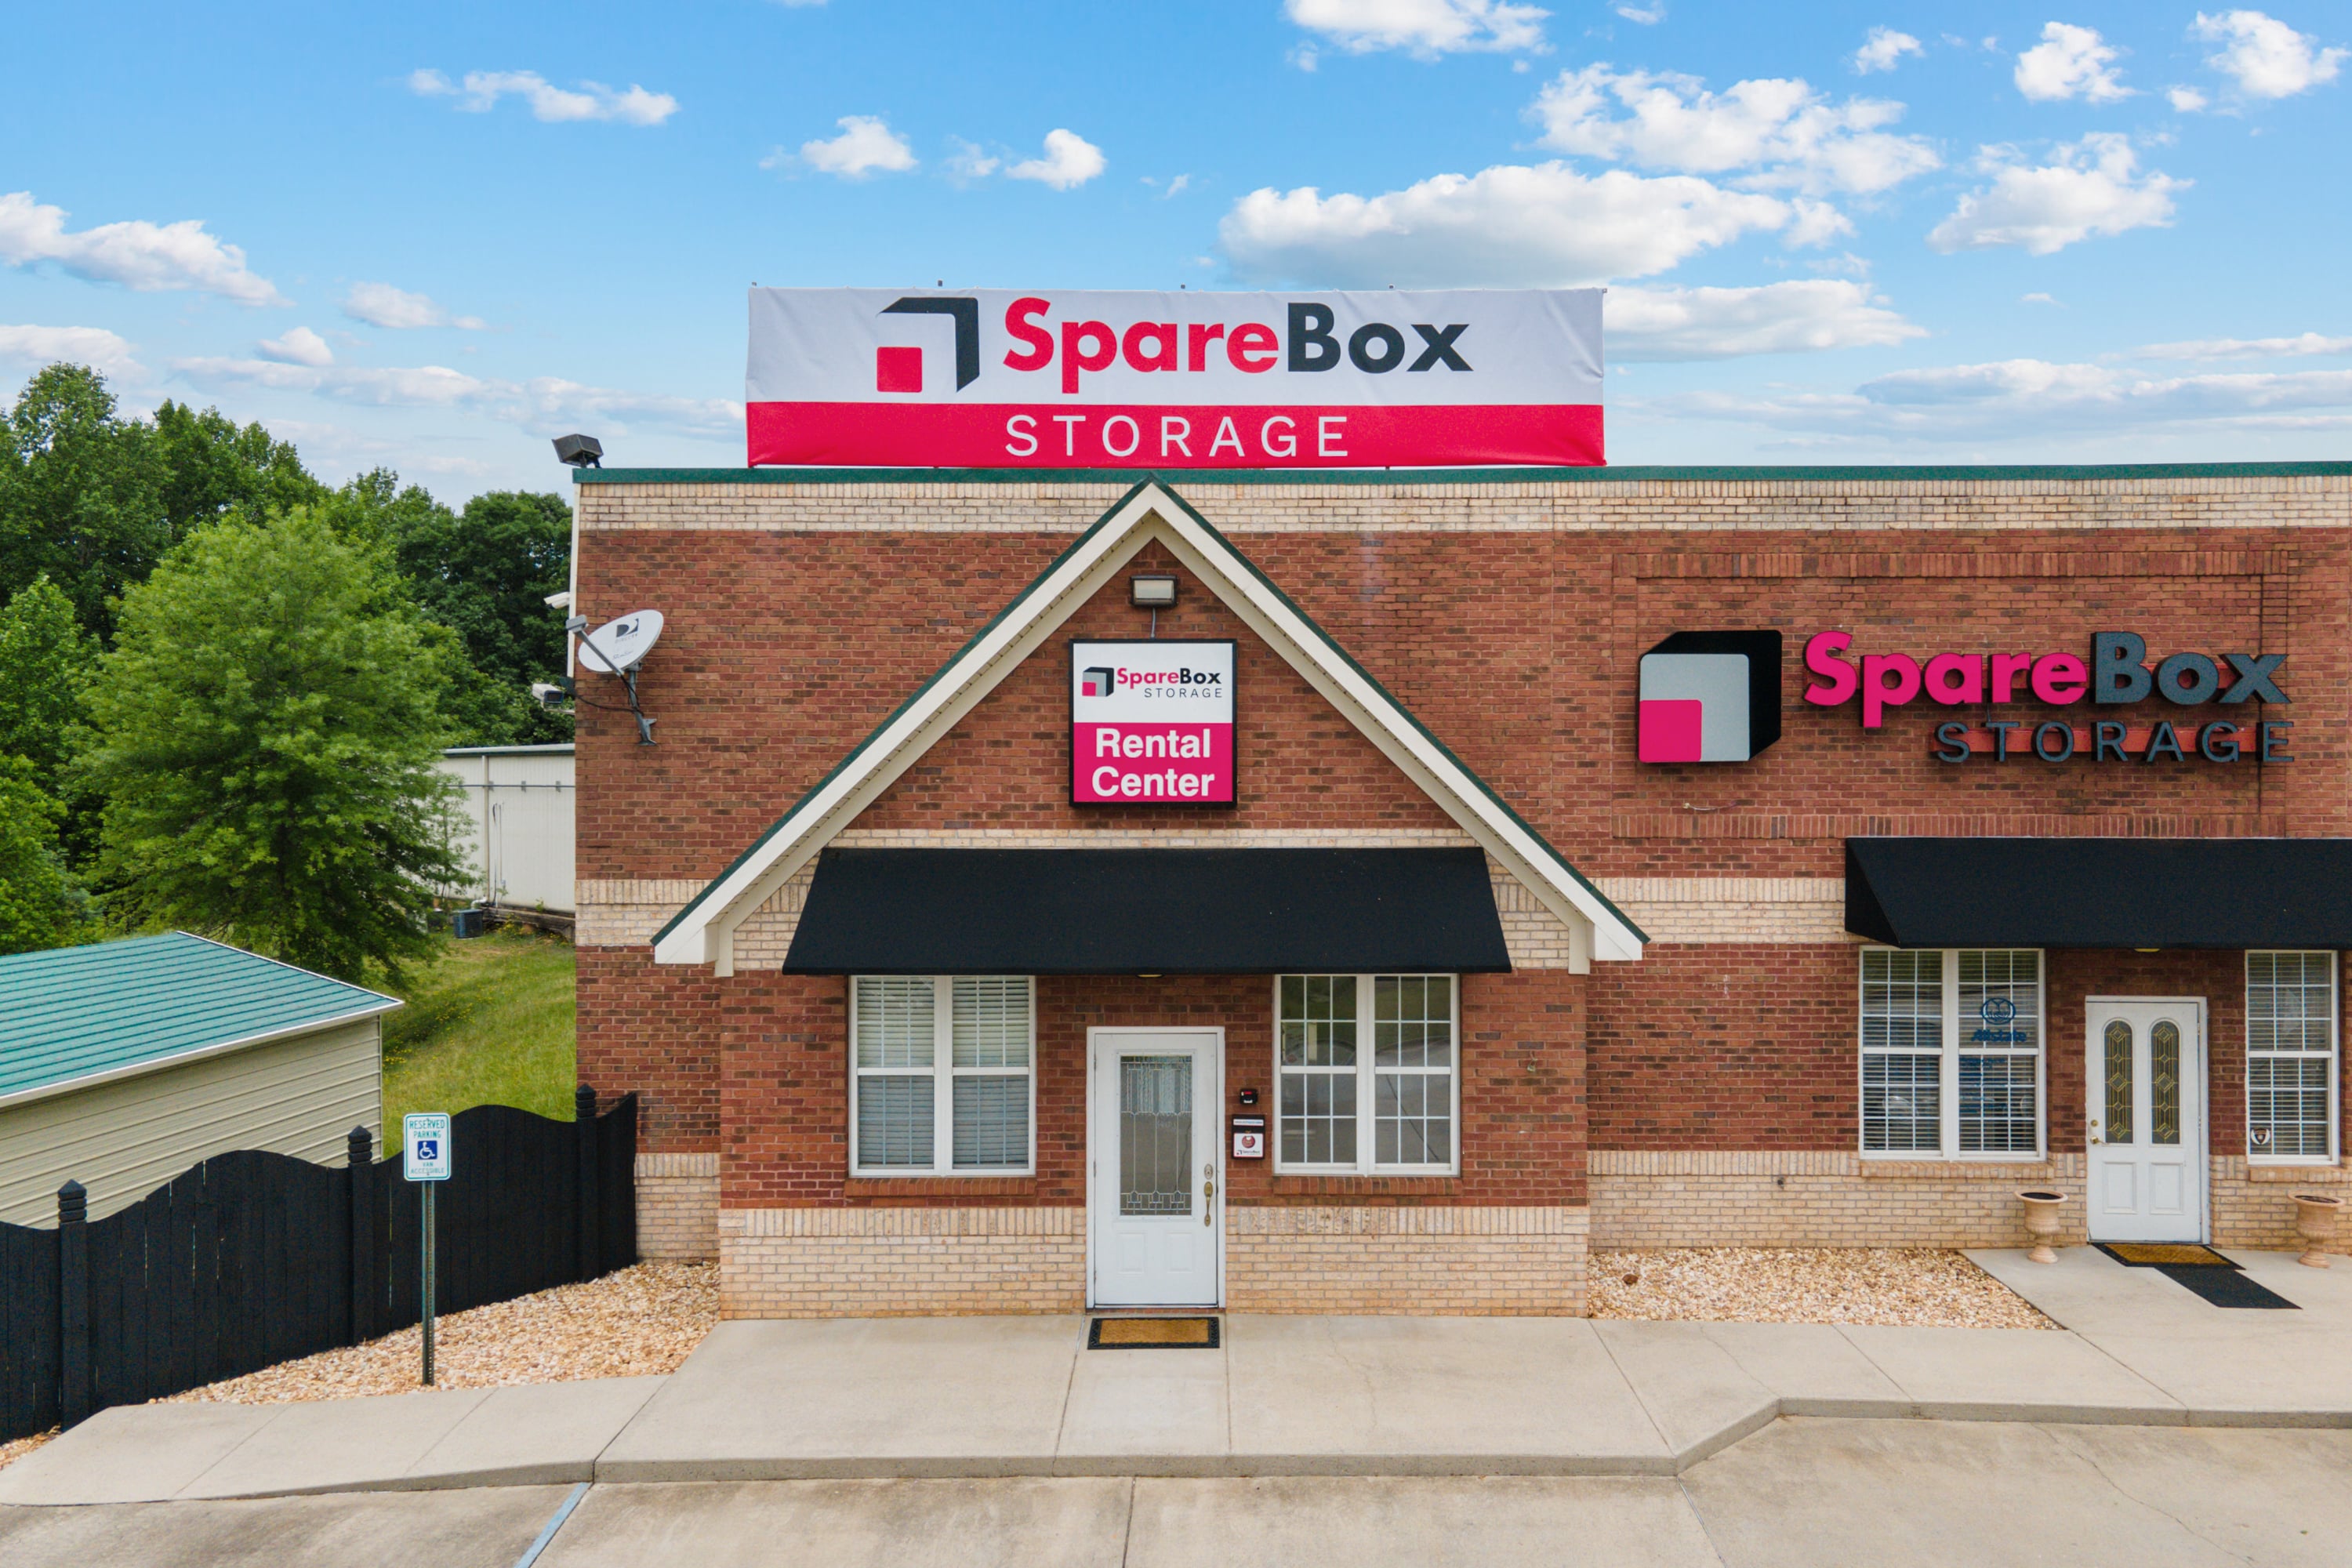 Outside view of SpareBox Storage facility in Cumming